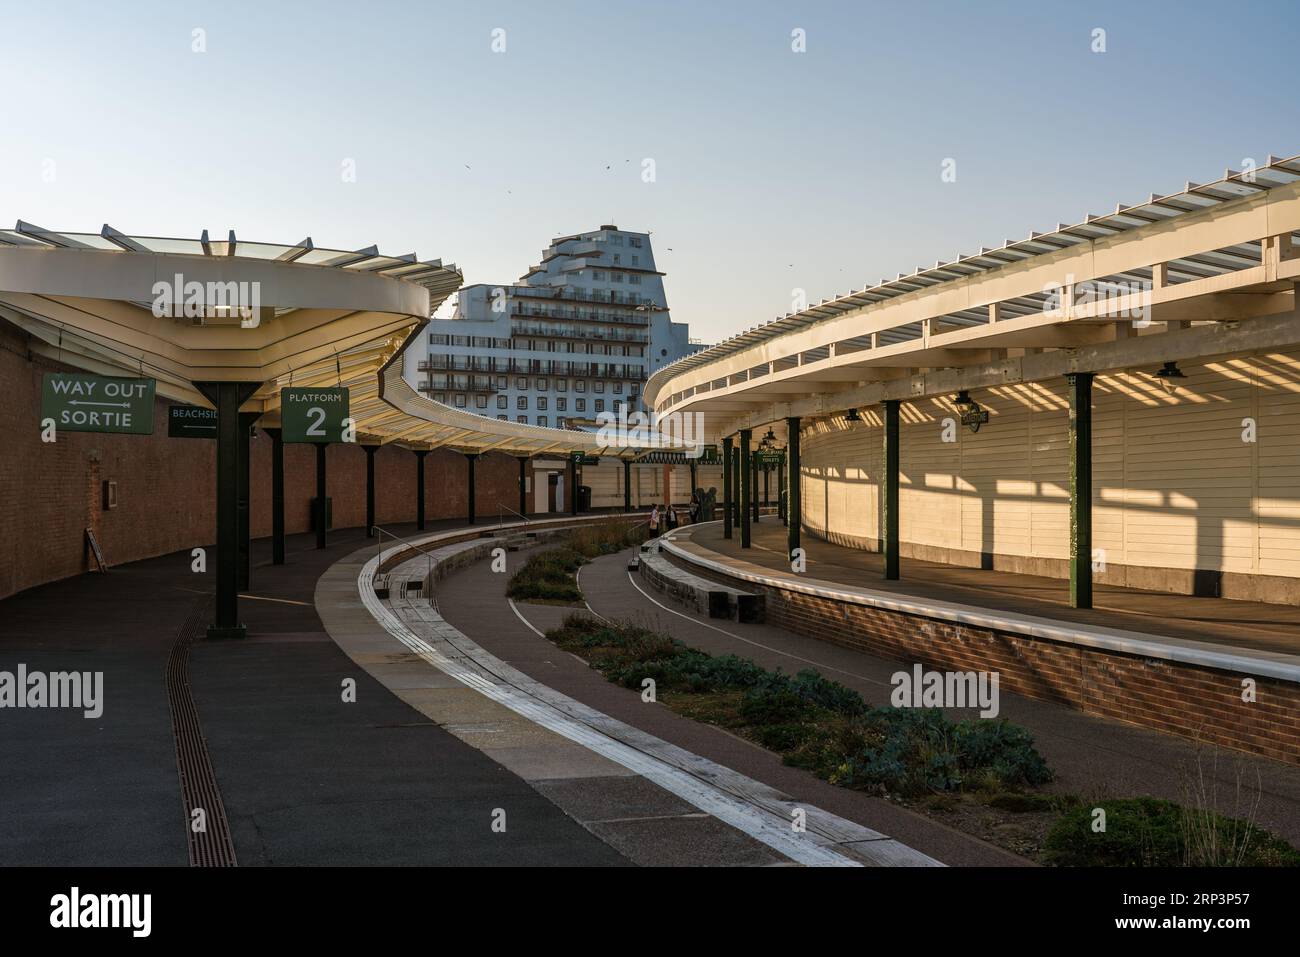 This is Folkestone Harbour Railway Station, an old out of use Railway Station which is now a popular travel destination on September 22, 2021 in Folke Stock Photo